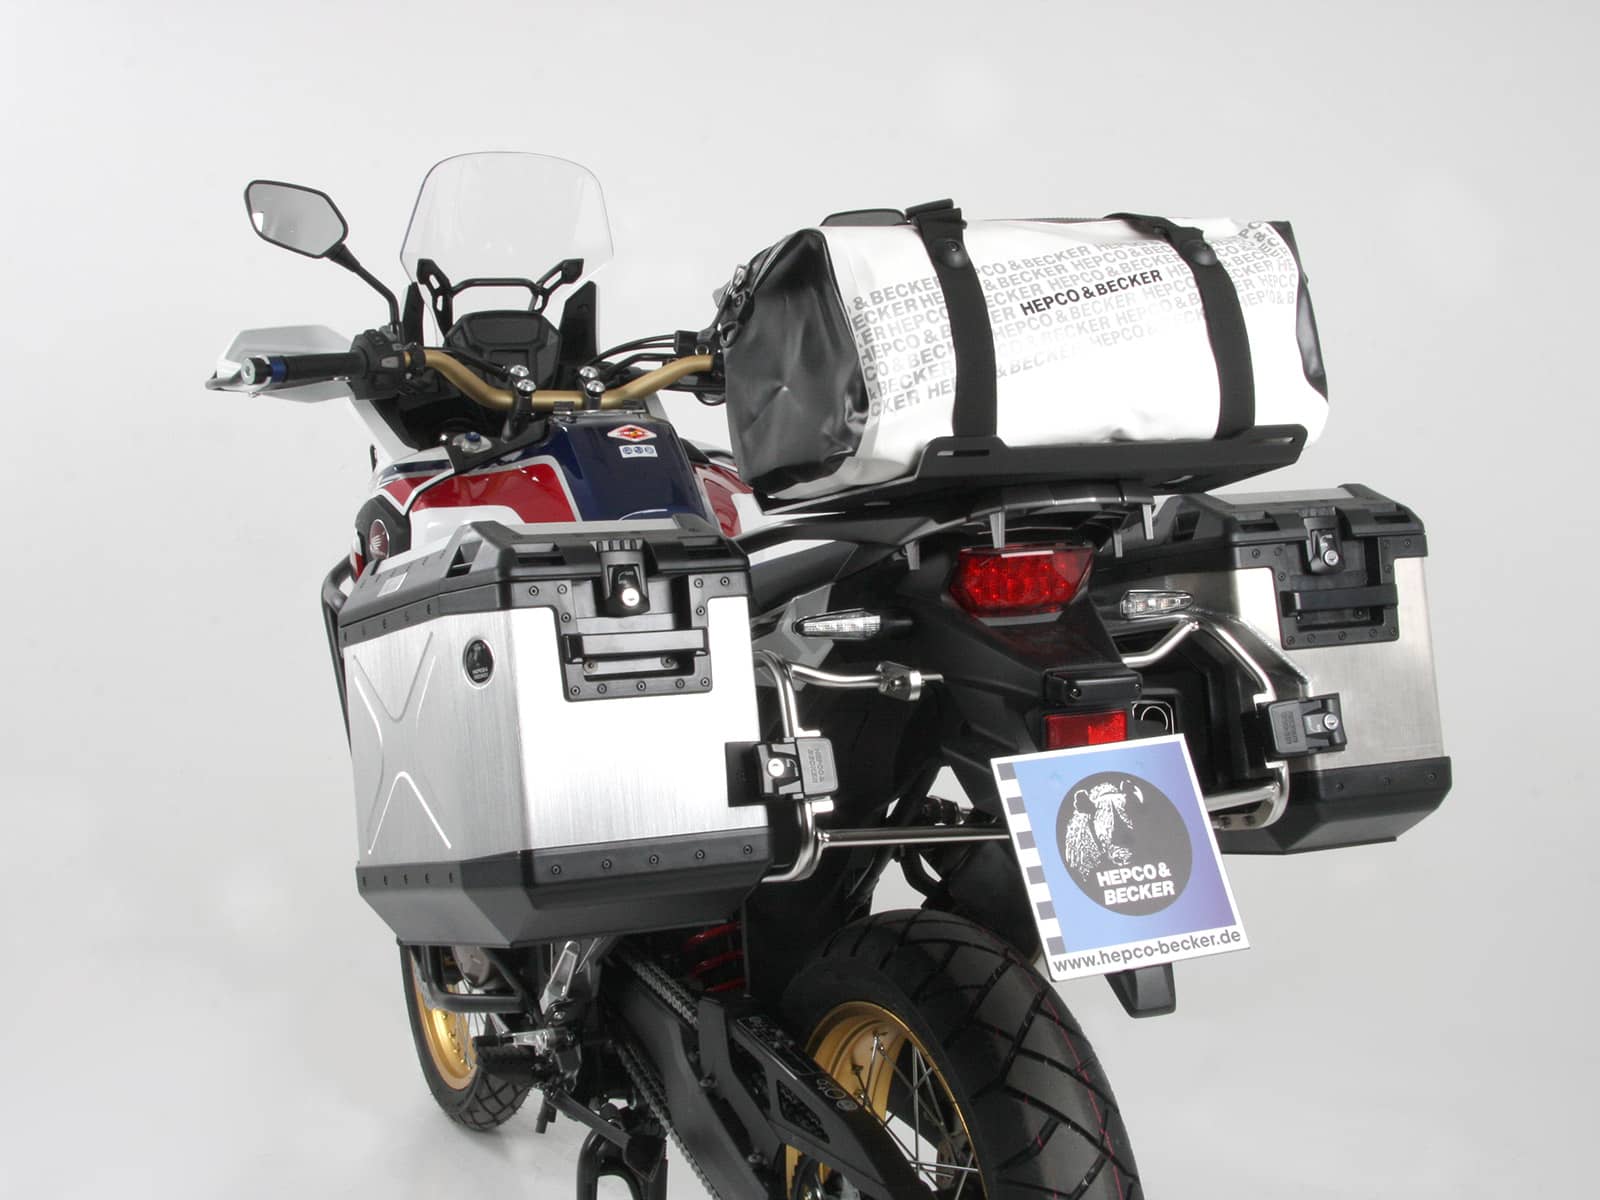 Modelspecific rear enlargement for Honda CRF 1000 Africa Twin (2018-2019)